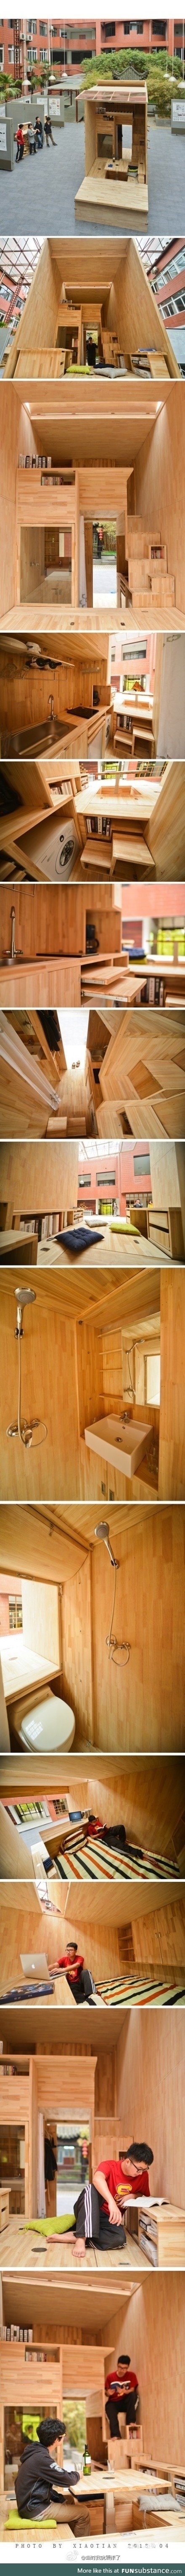 Student architect in China constructs his own 75 ft² wooden house